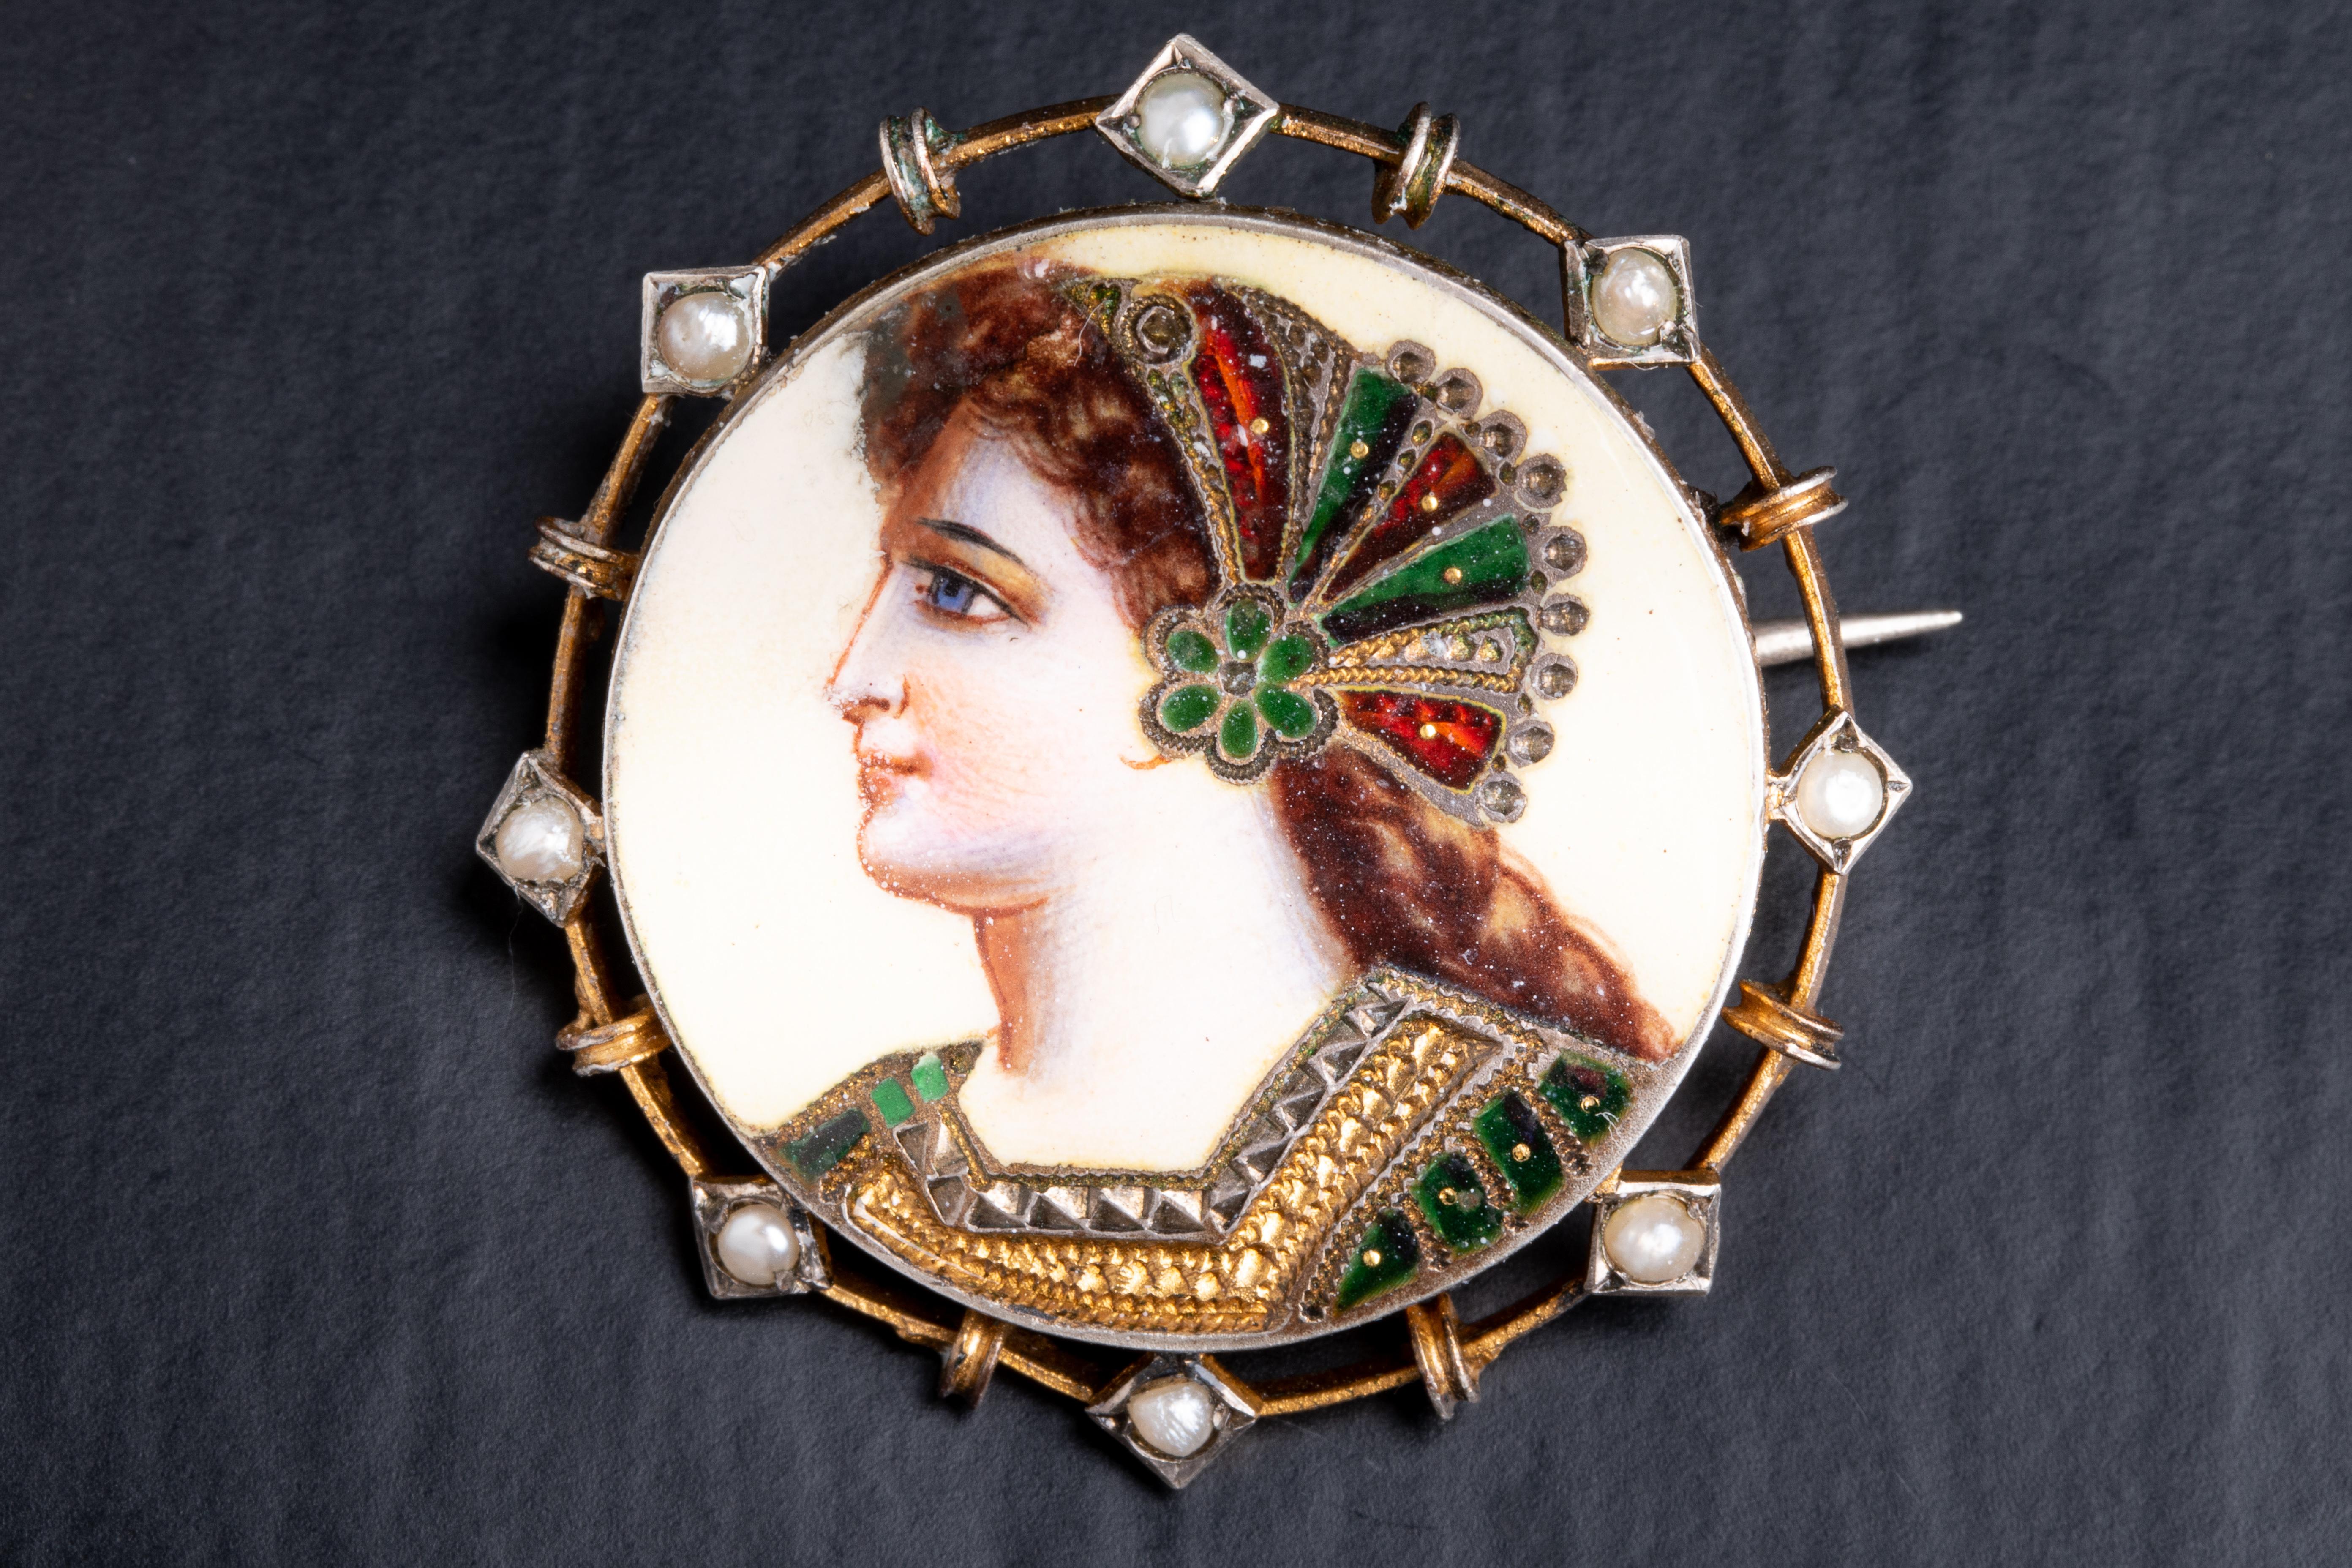 A lovely antique Art Nouveau era silver brooch with an enamel portrait. The portrait is enameled and is preserved in a superb condition with no wear or damage.

The brooch is gold plated and accepted with split pearls.

Made of 835/1000 silver, this